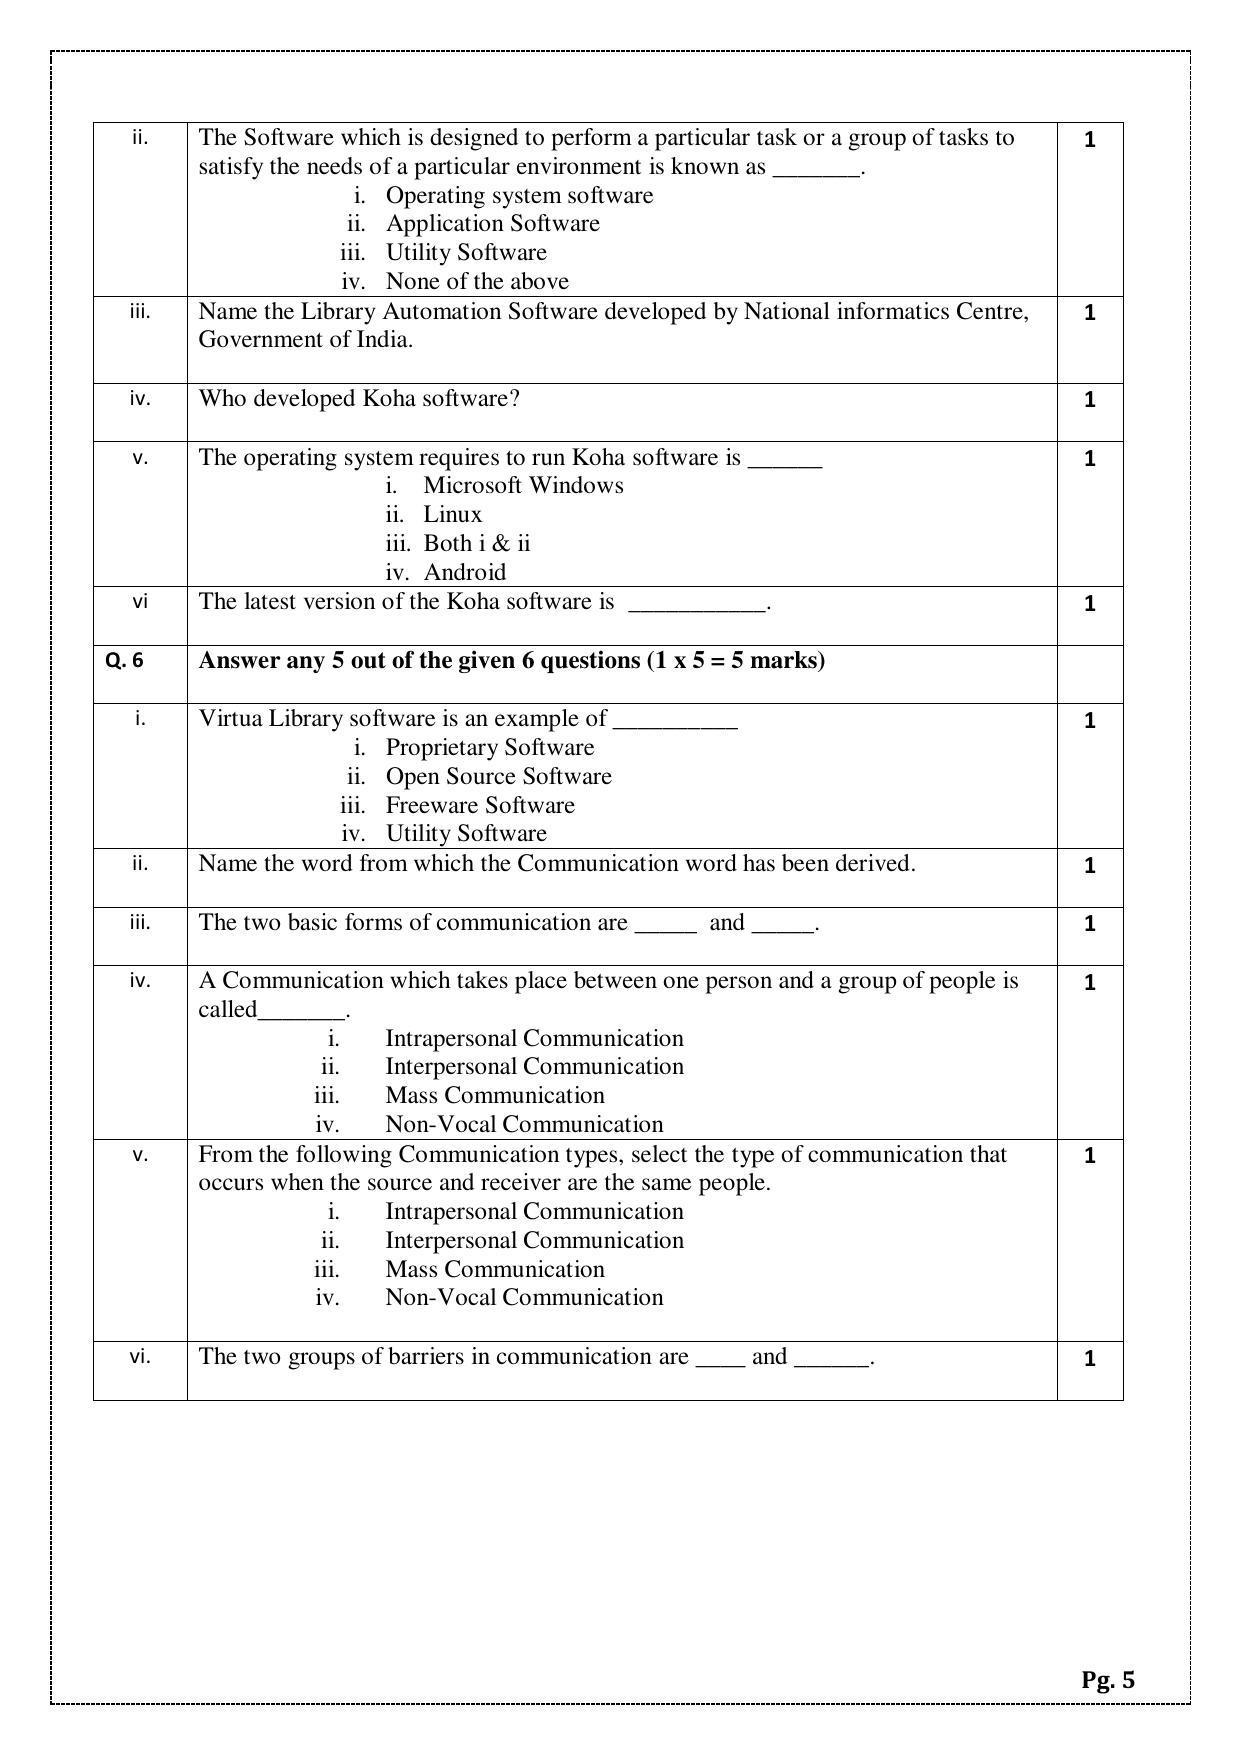 CBSE Class 10 Library & Information Science (Skill Education) Sample Papers 2023 - Page 5